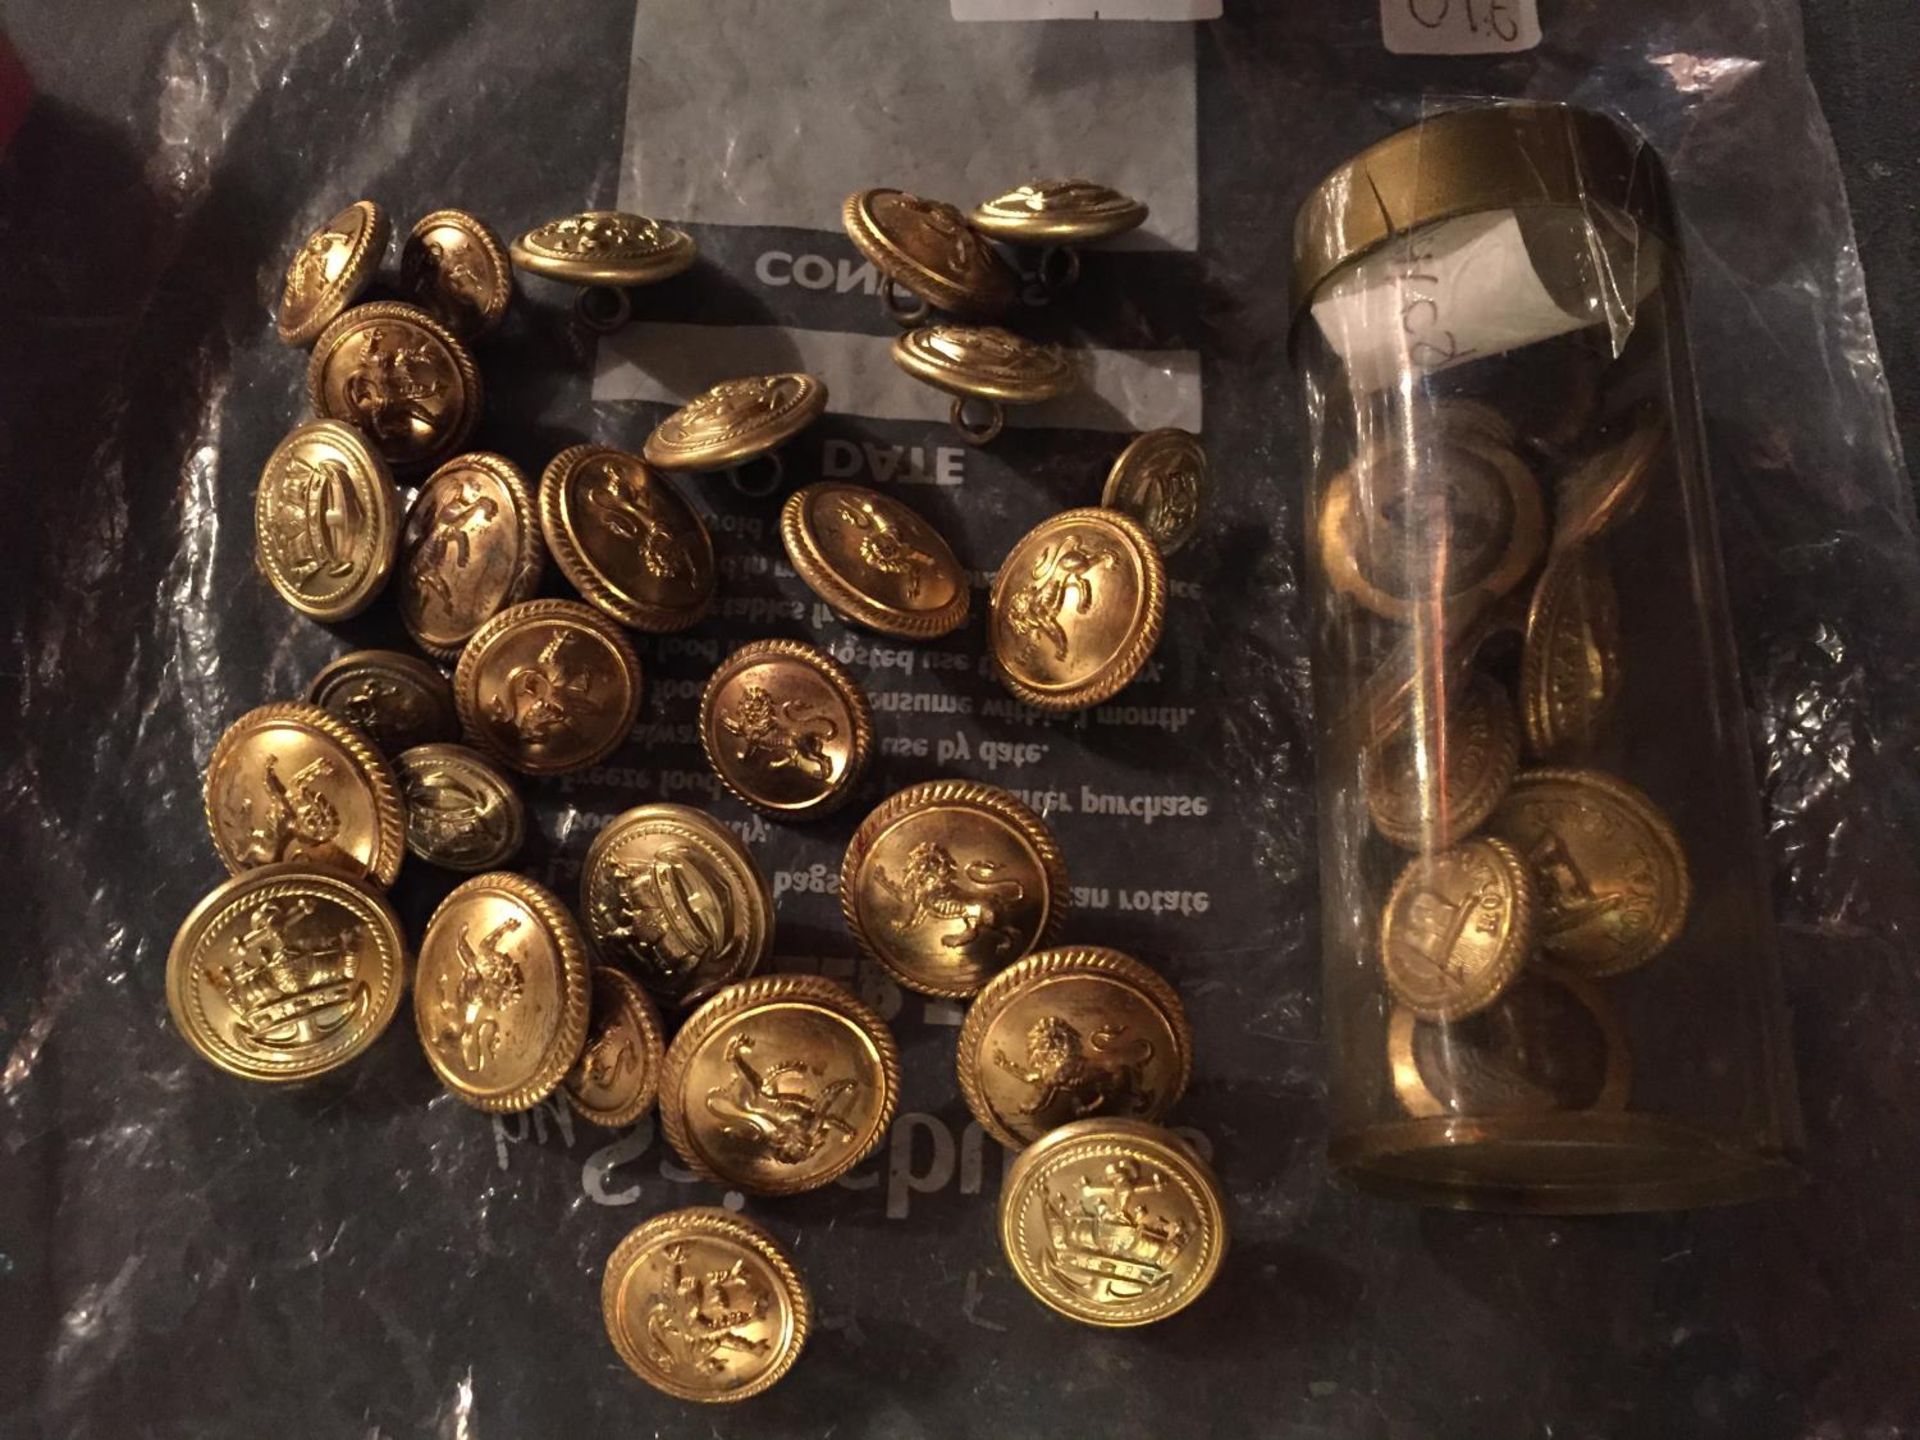 A LARGE SELECTION OF MILITARY BRASS BUTTONS